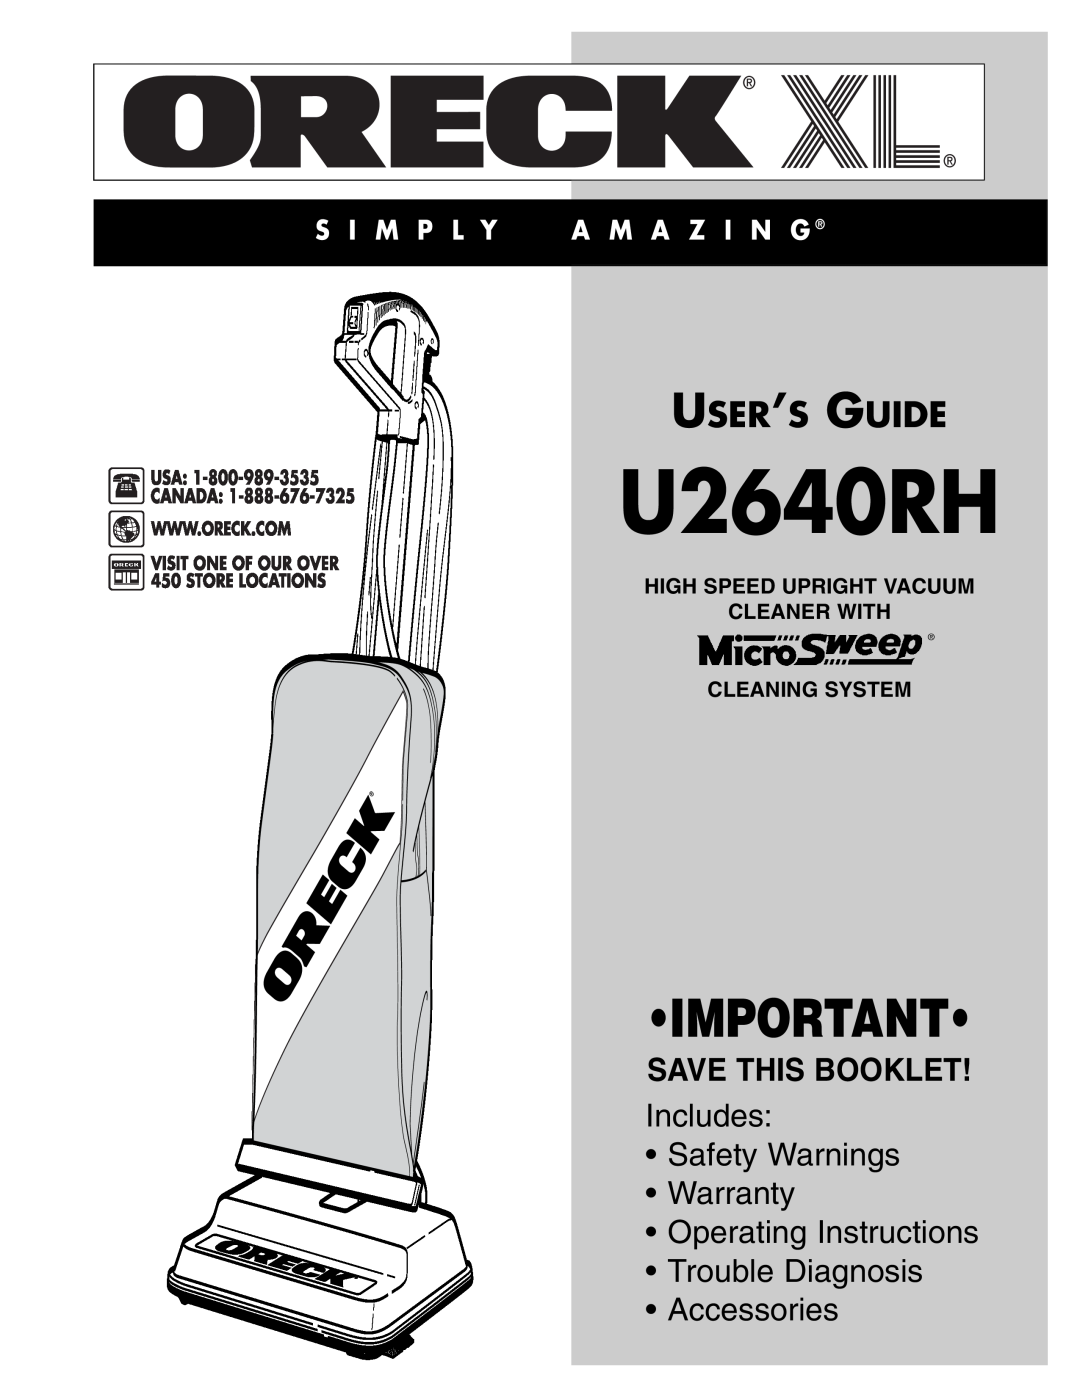 Oreck U2640RH warranty Save This Booklet, High Speed Upright Vacuum Cleaner With, Cleaning System, User’S Guide 